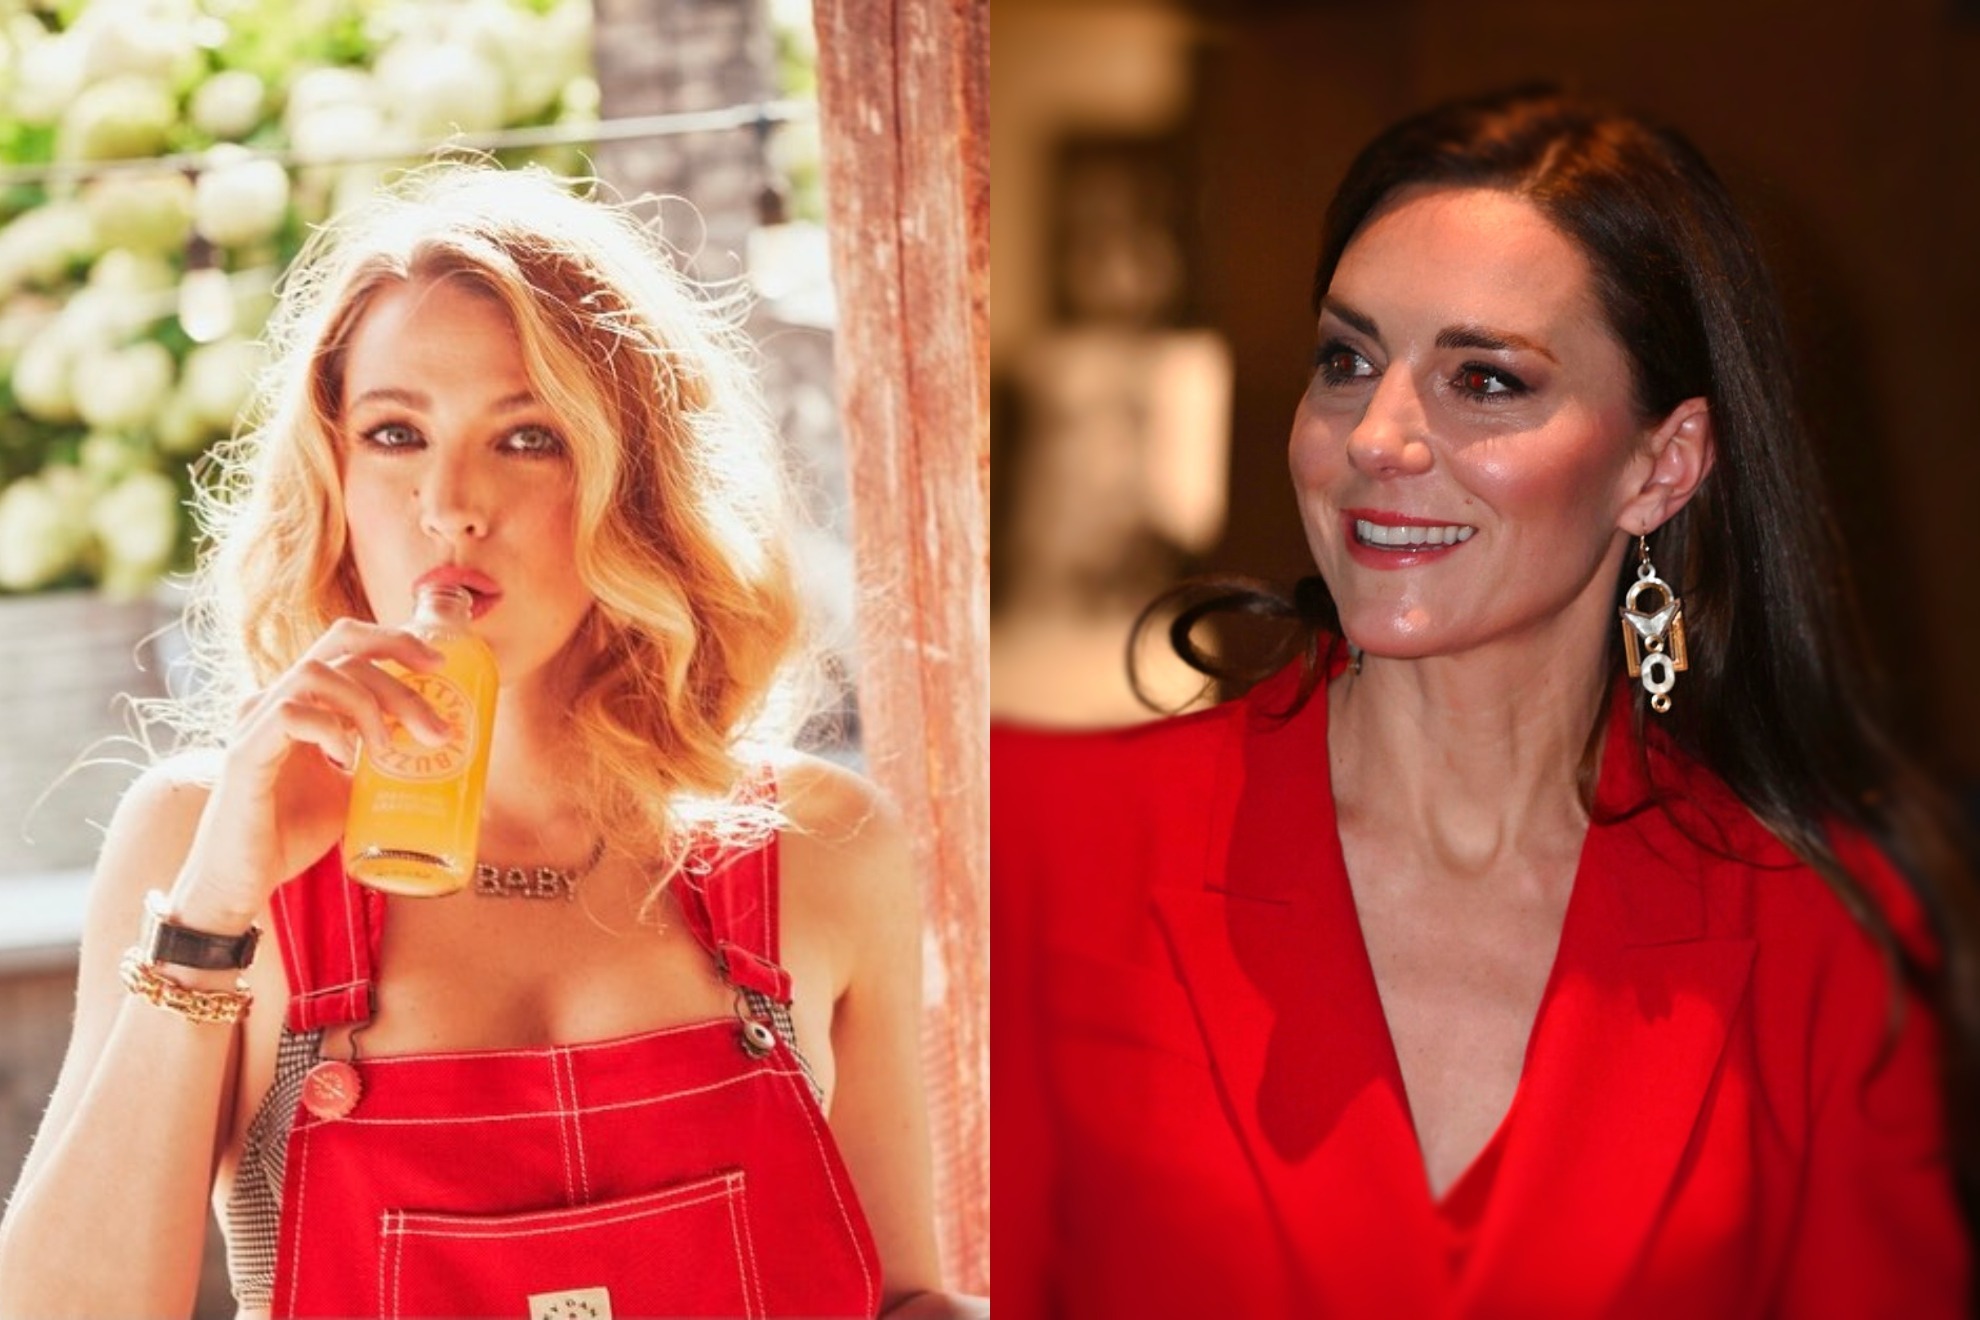 Blake Lively apologizes for trying to be funny at Kate Middletons expense via an ad campaign